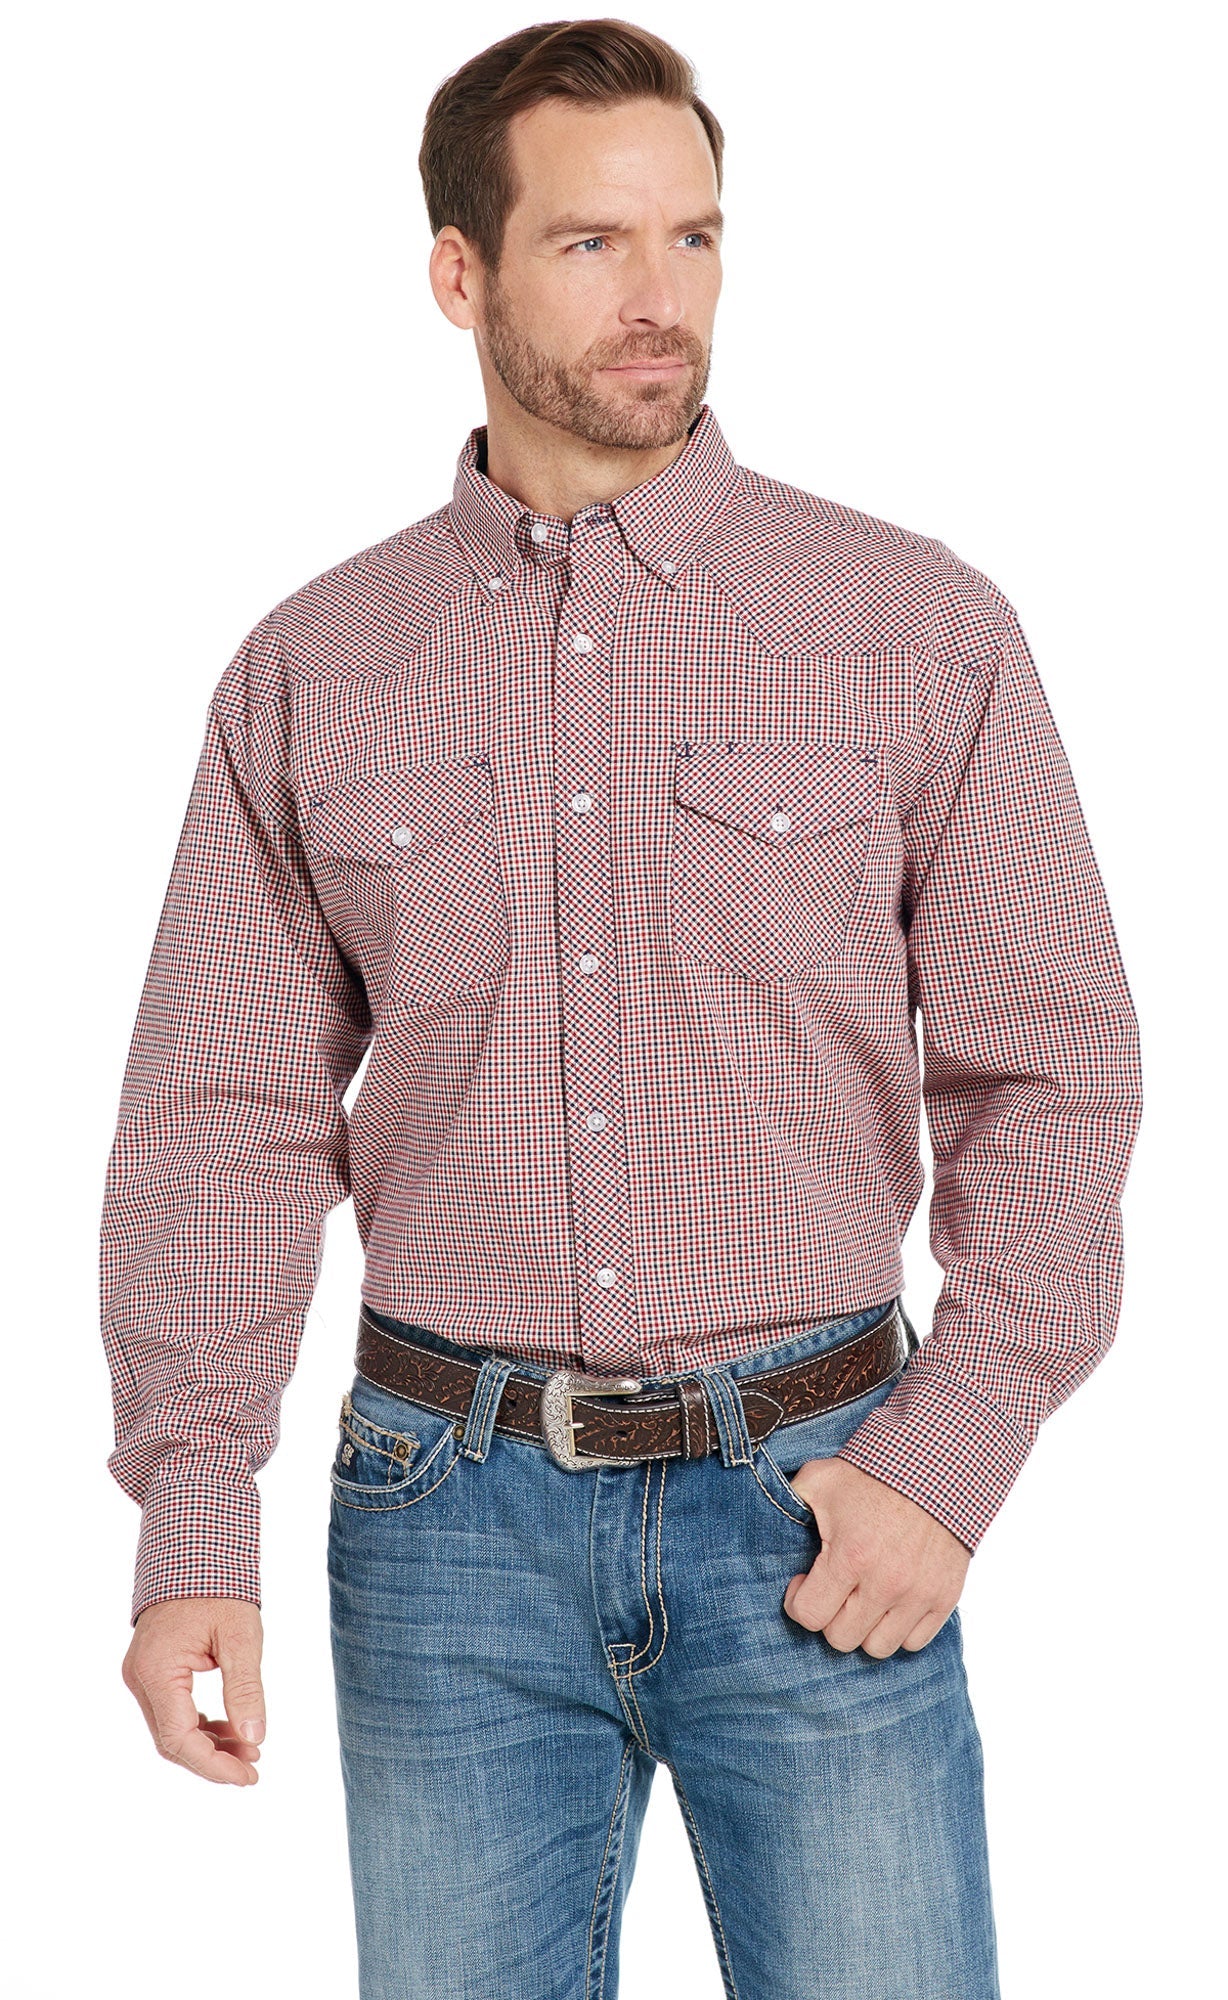 western style button up shirts